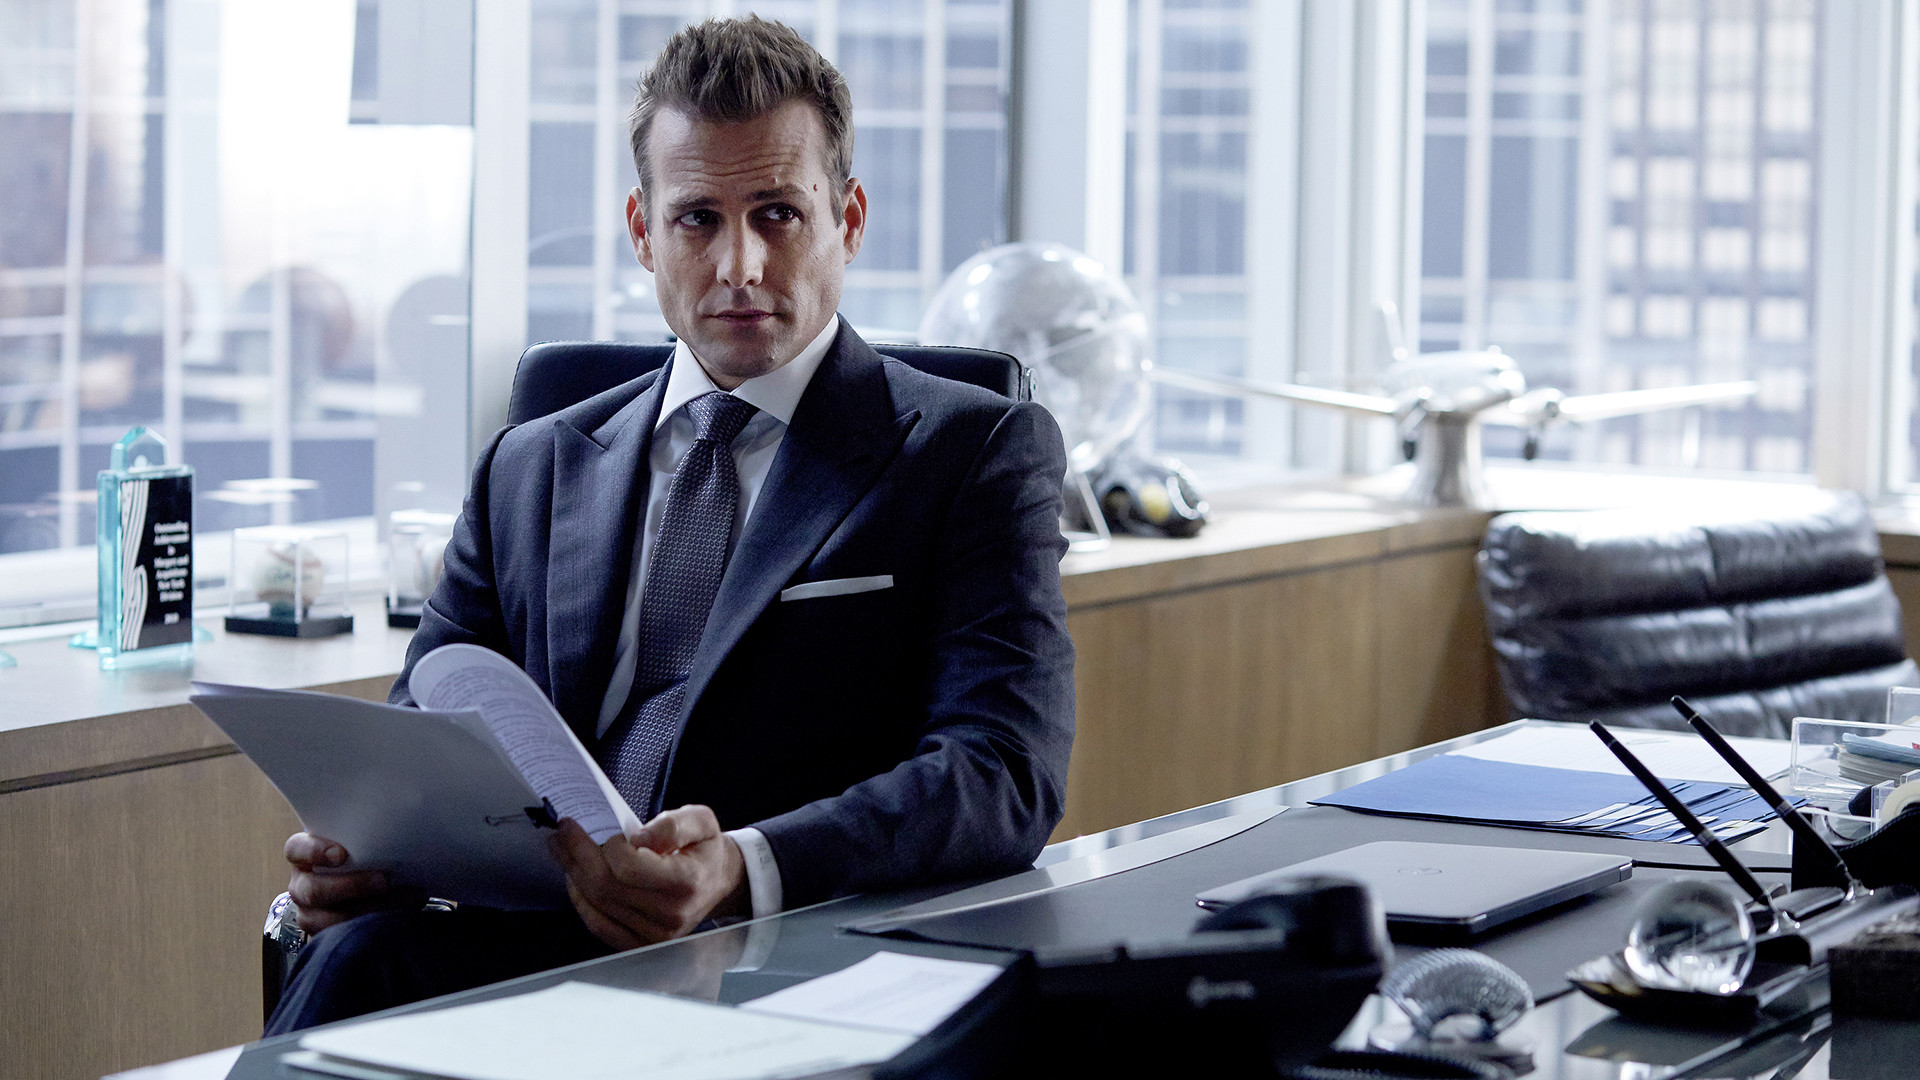 1920x1080 Suits Creator Picks 7 of Harvey Specter's Most Admirable Qualities | Blog |  Suits | USA Network